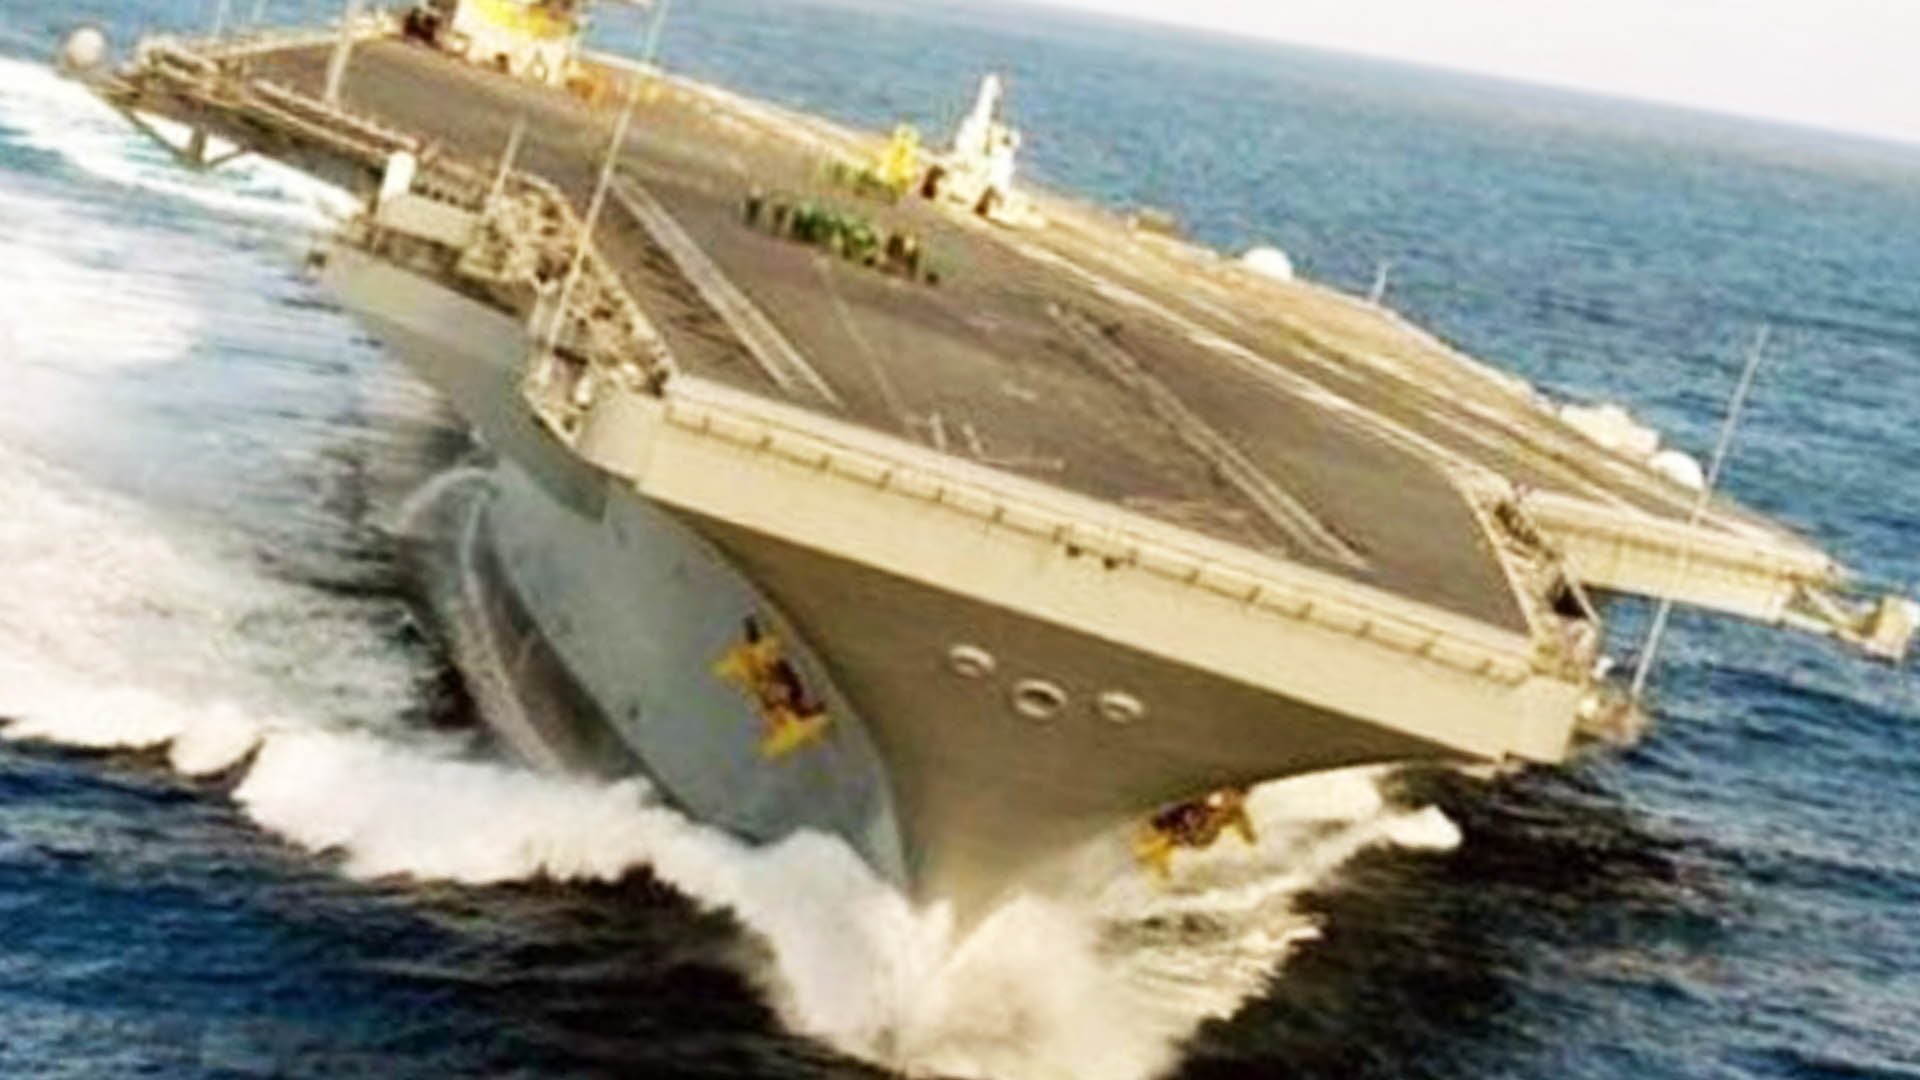 Refueling Gigantic Aircraft Carriers With Millions $ of Oil - YouTube